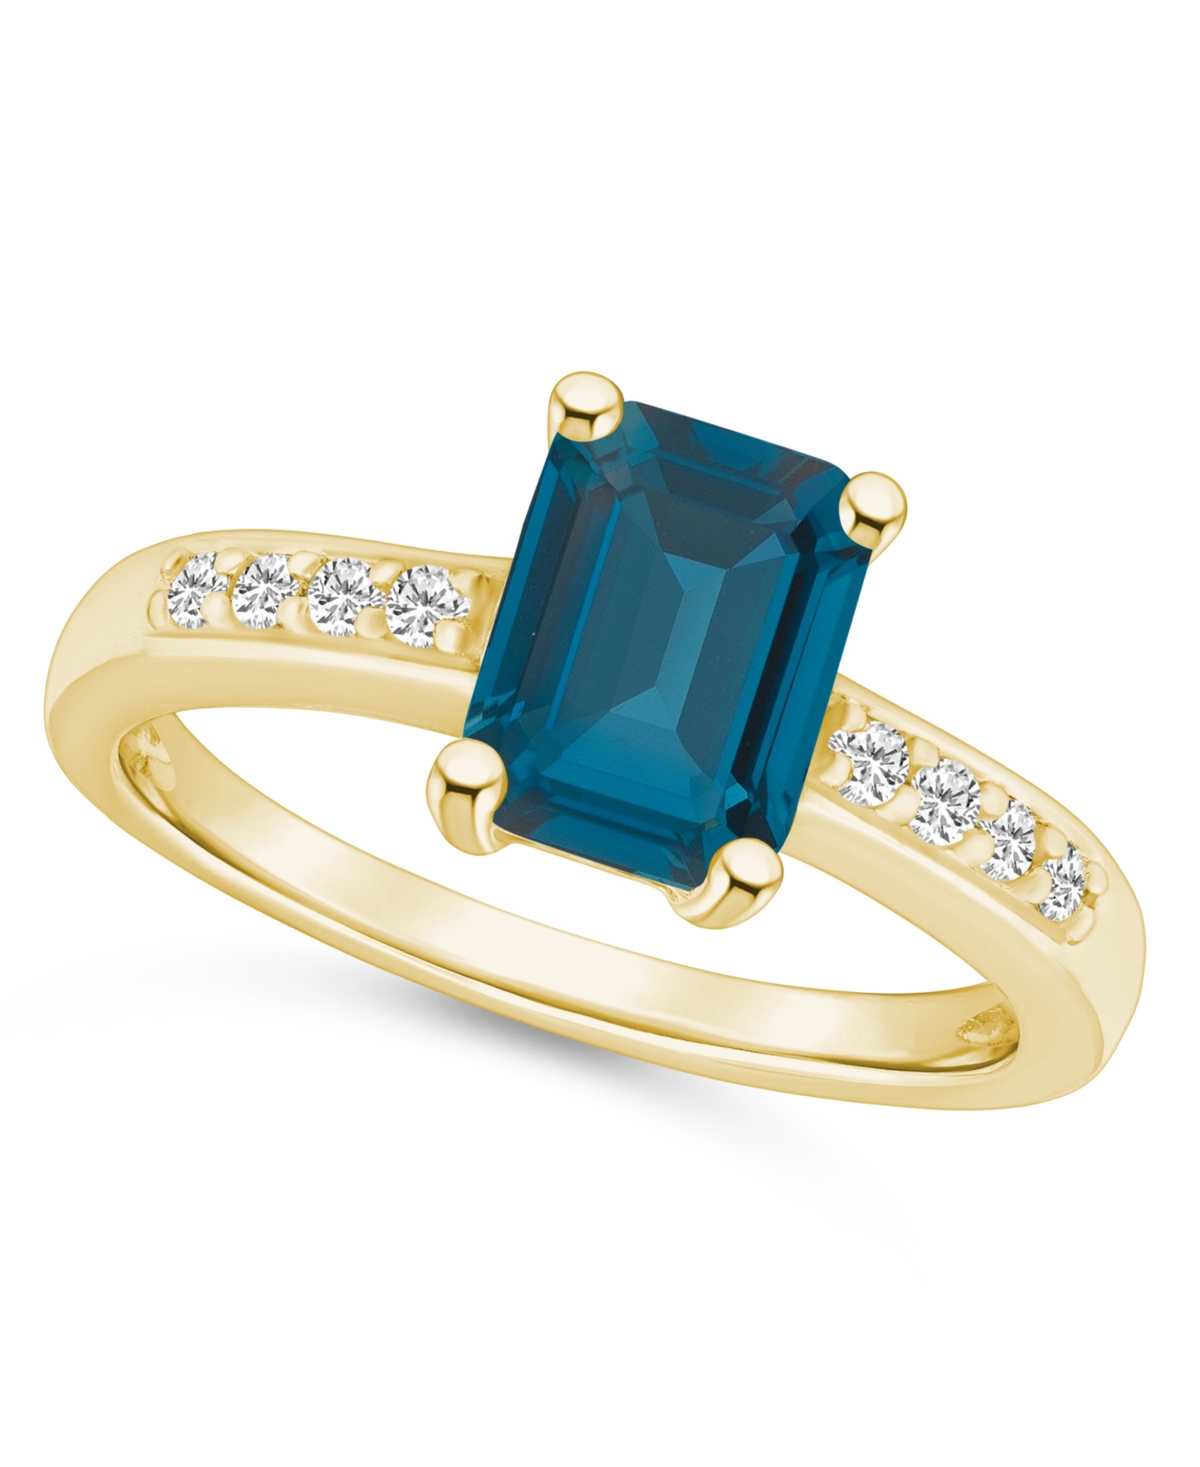 Macy's London Blue Topaz (2 Ct .t.w.) And Diamond (1/8 Ct .t.w.) Ring In 14k Yellow Gold